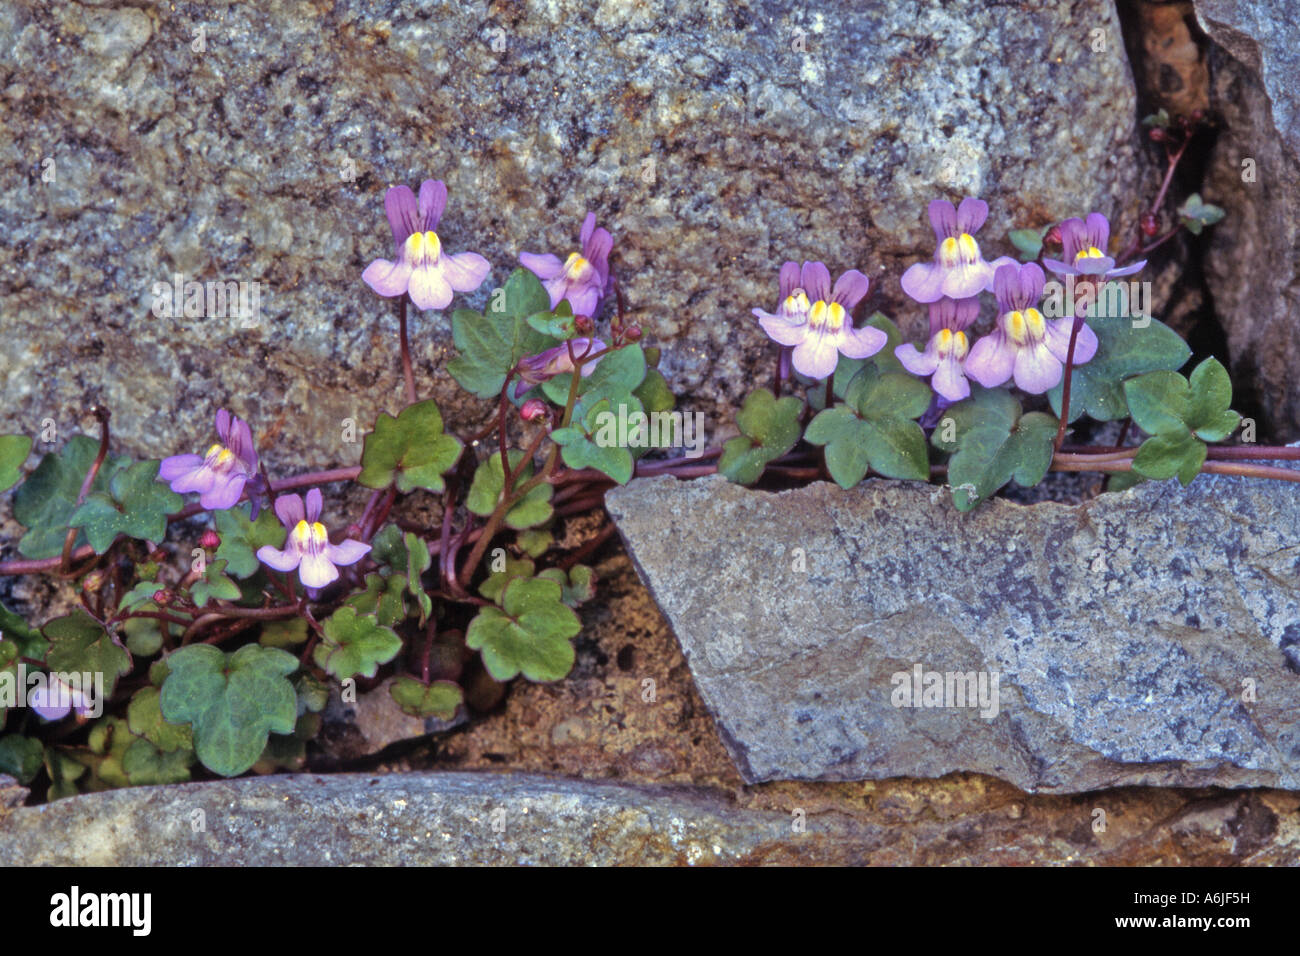 Ivy leaved Toadflax (Cymbalaria muralis, Linaria cymbalaria) flowering in a rock crevice Stock Photo